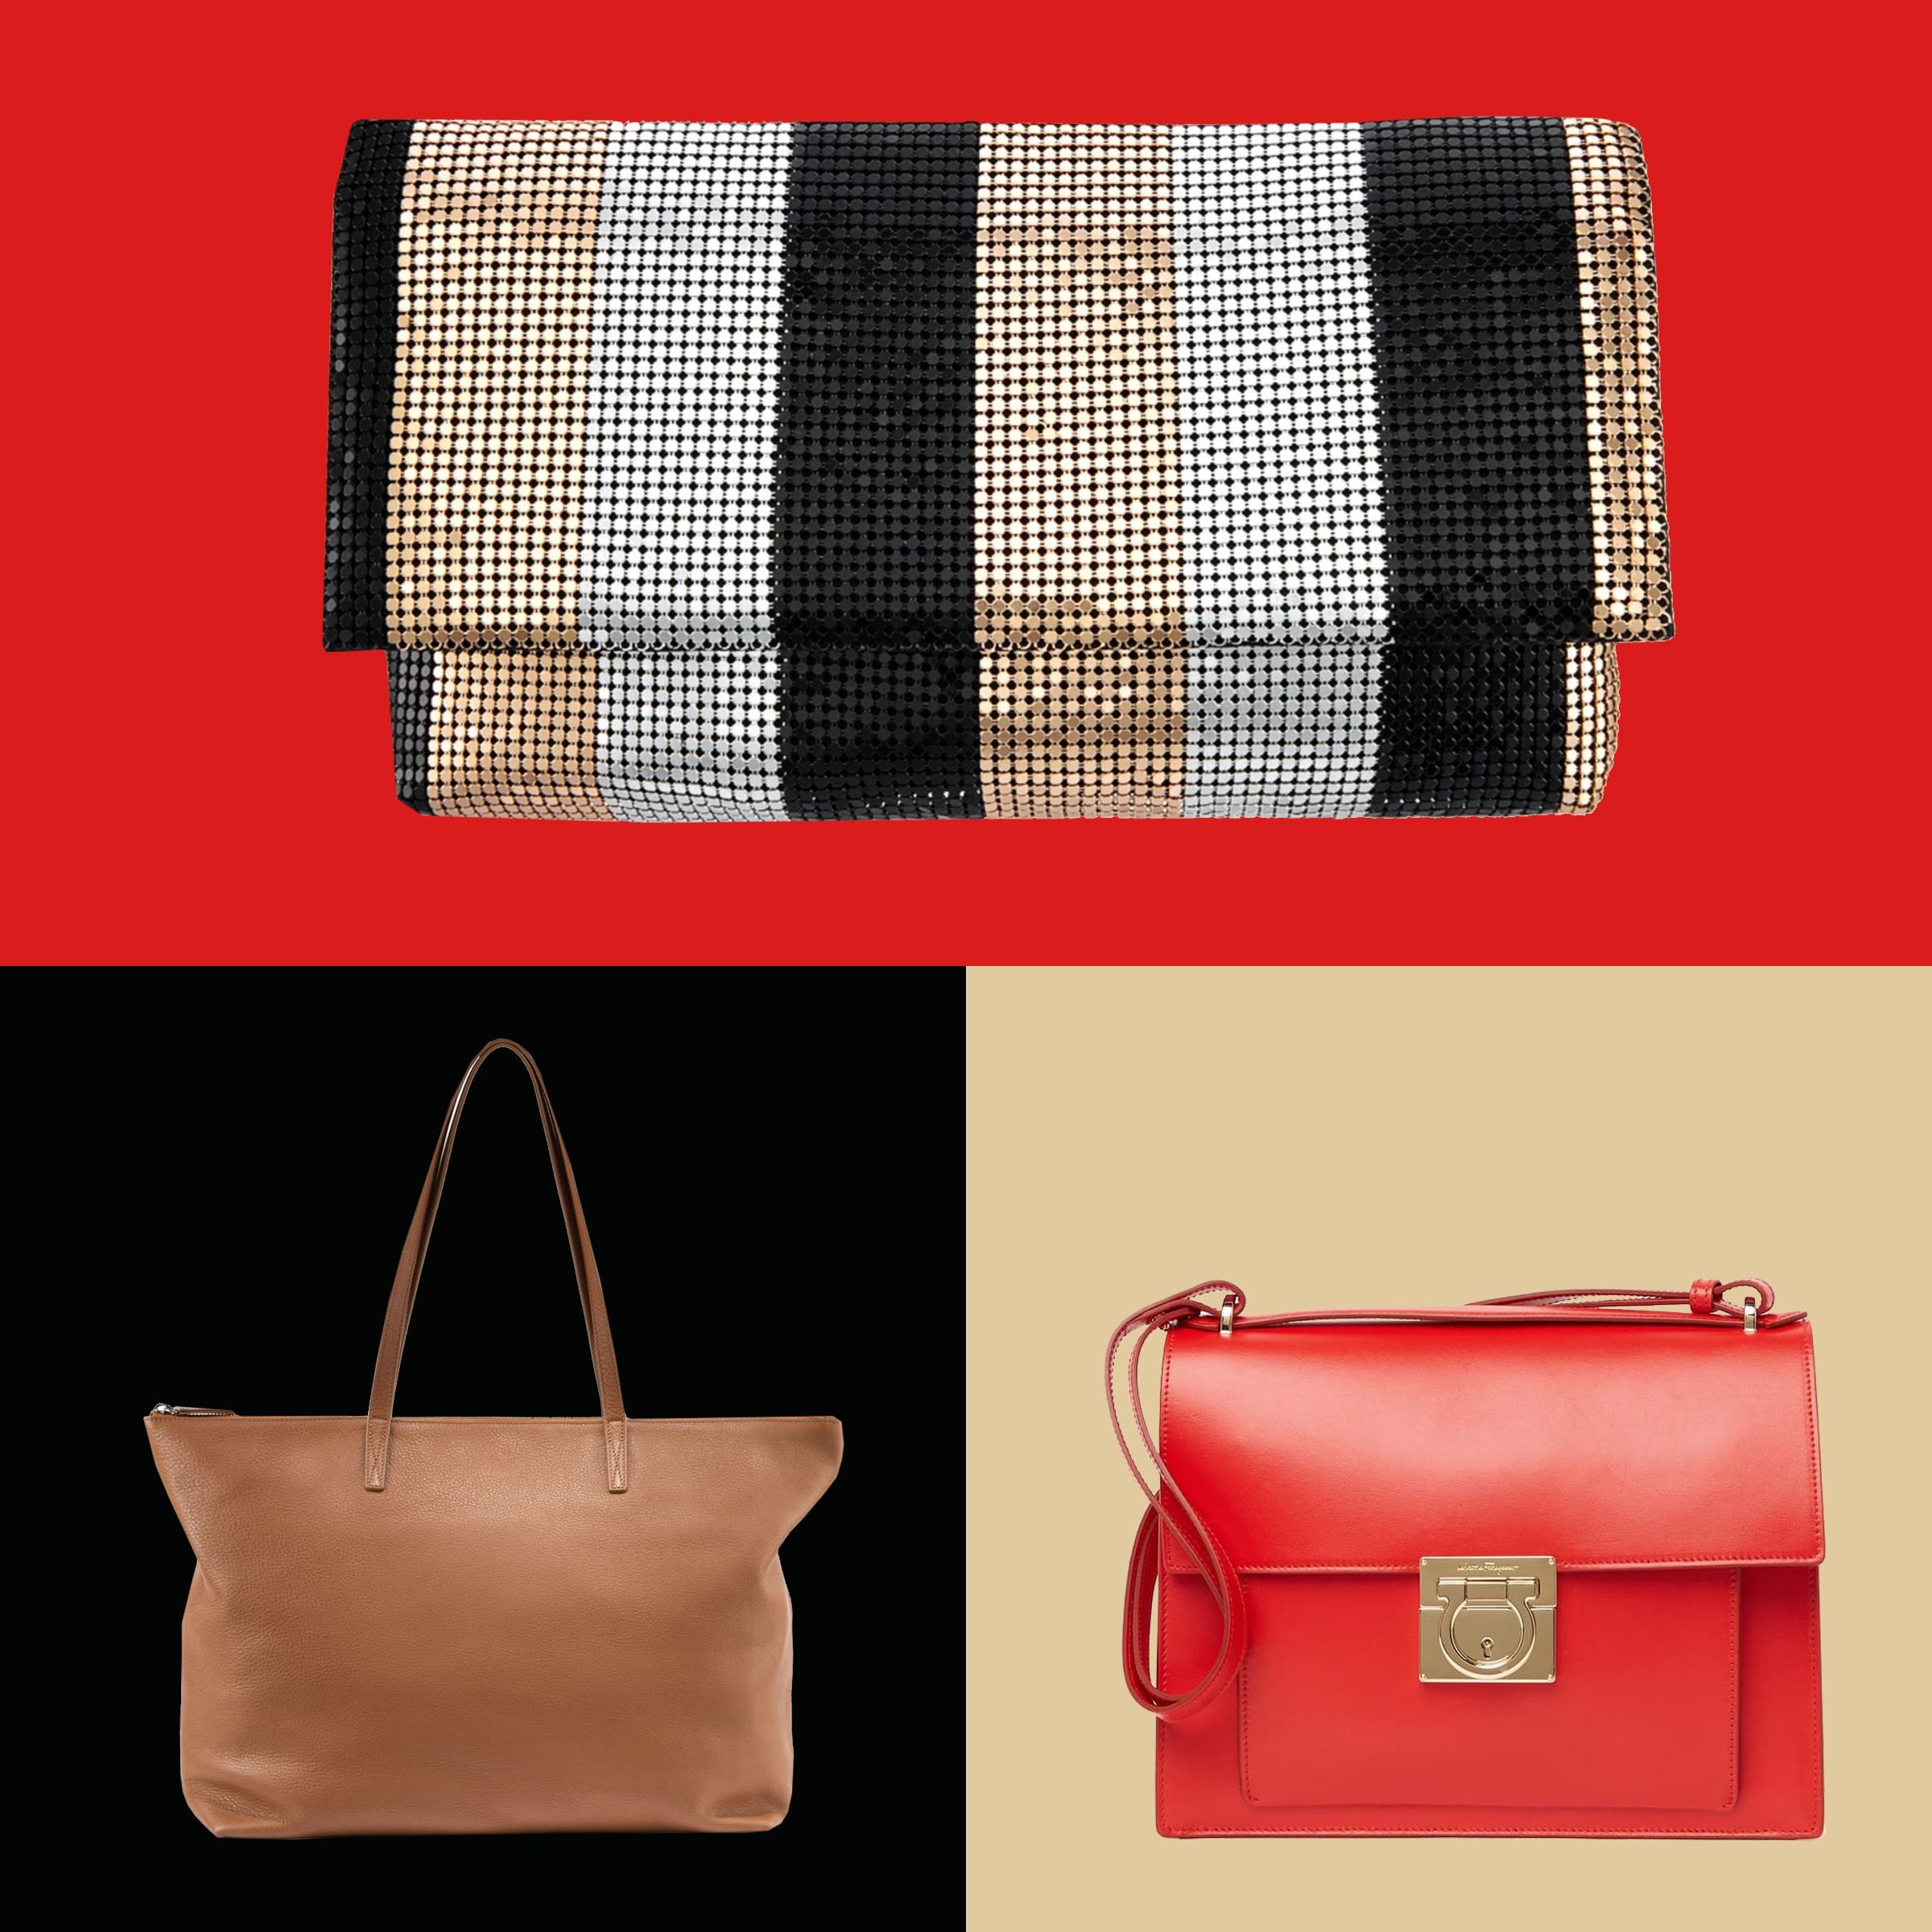 13 Classic Handbags Every Woman Should Own